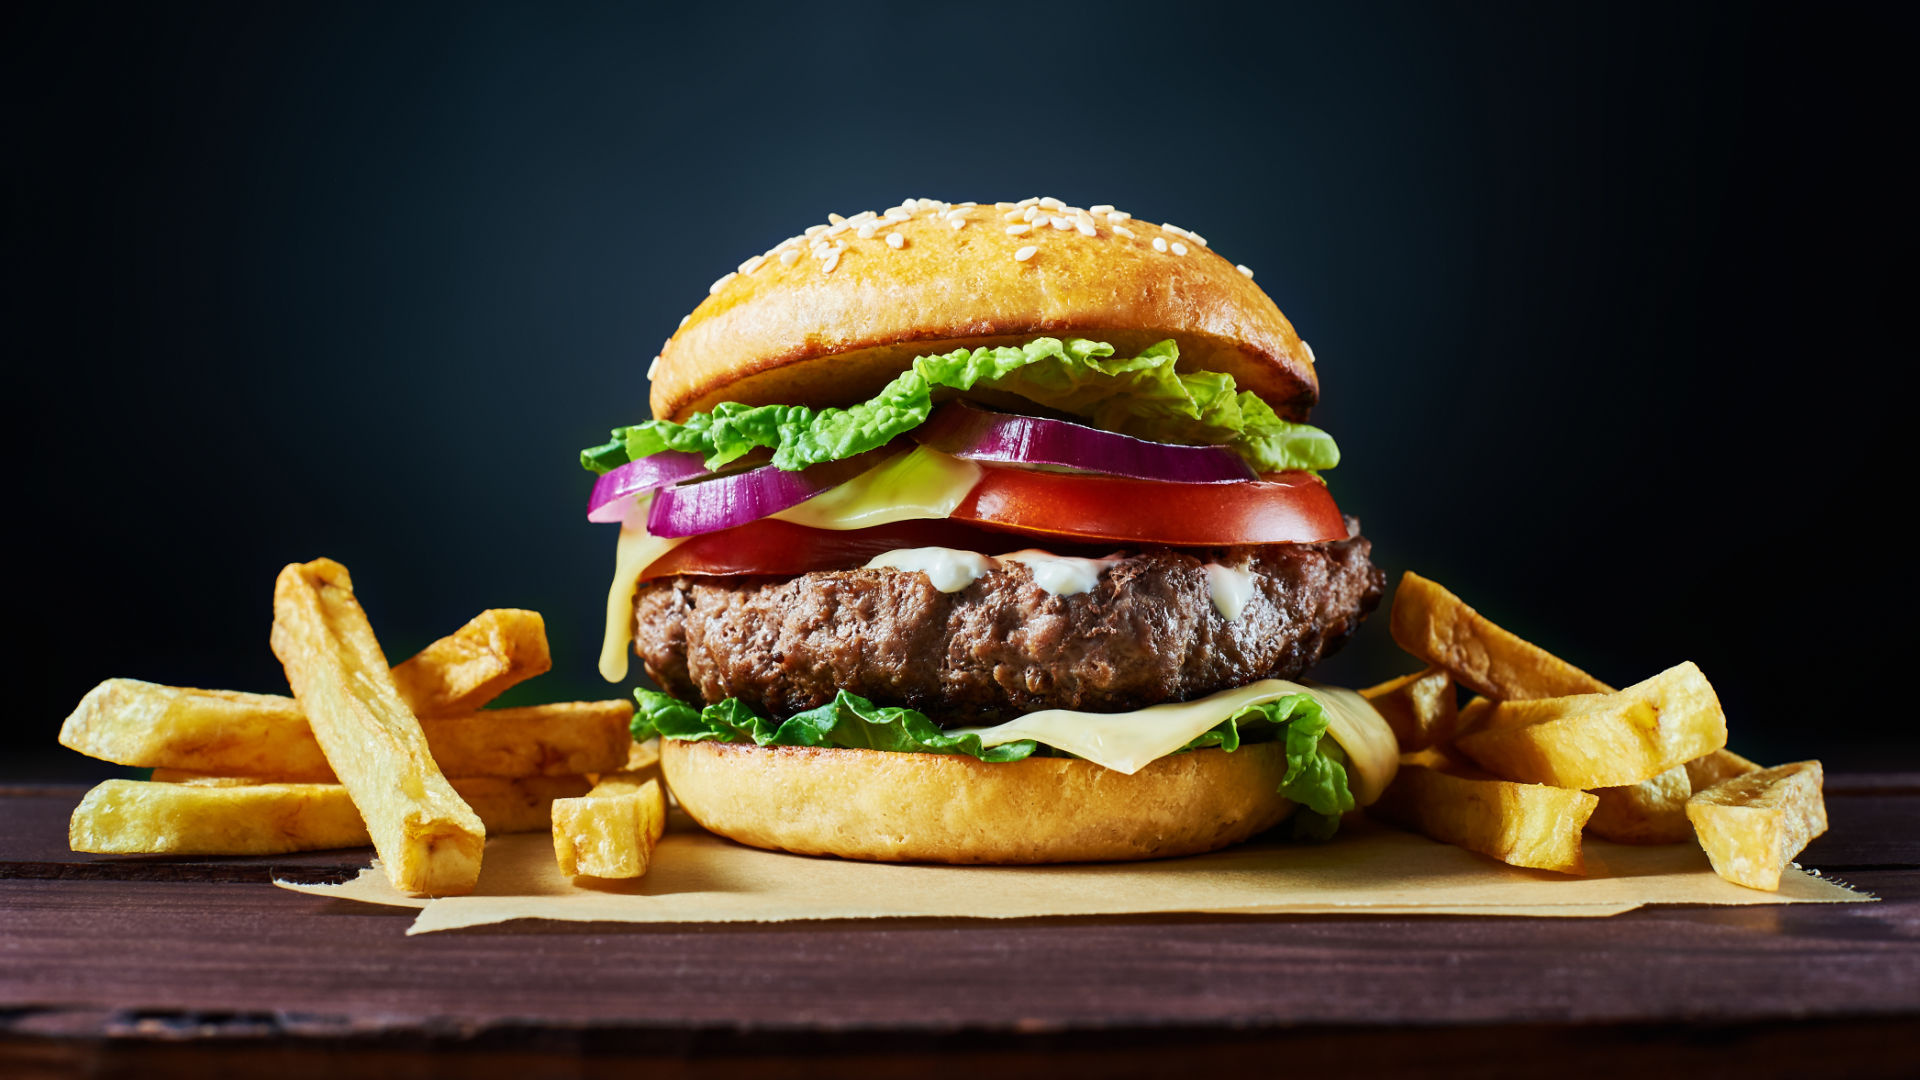 Hamburger: Grad Beefer, Considered a national dish of the United States. 1920x1080 Full HD Background.